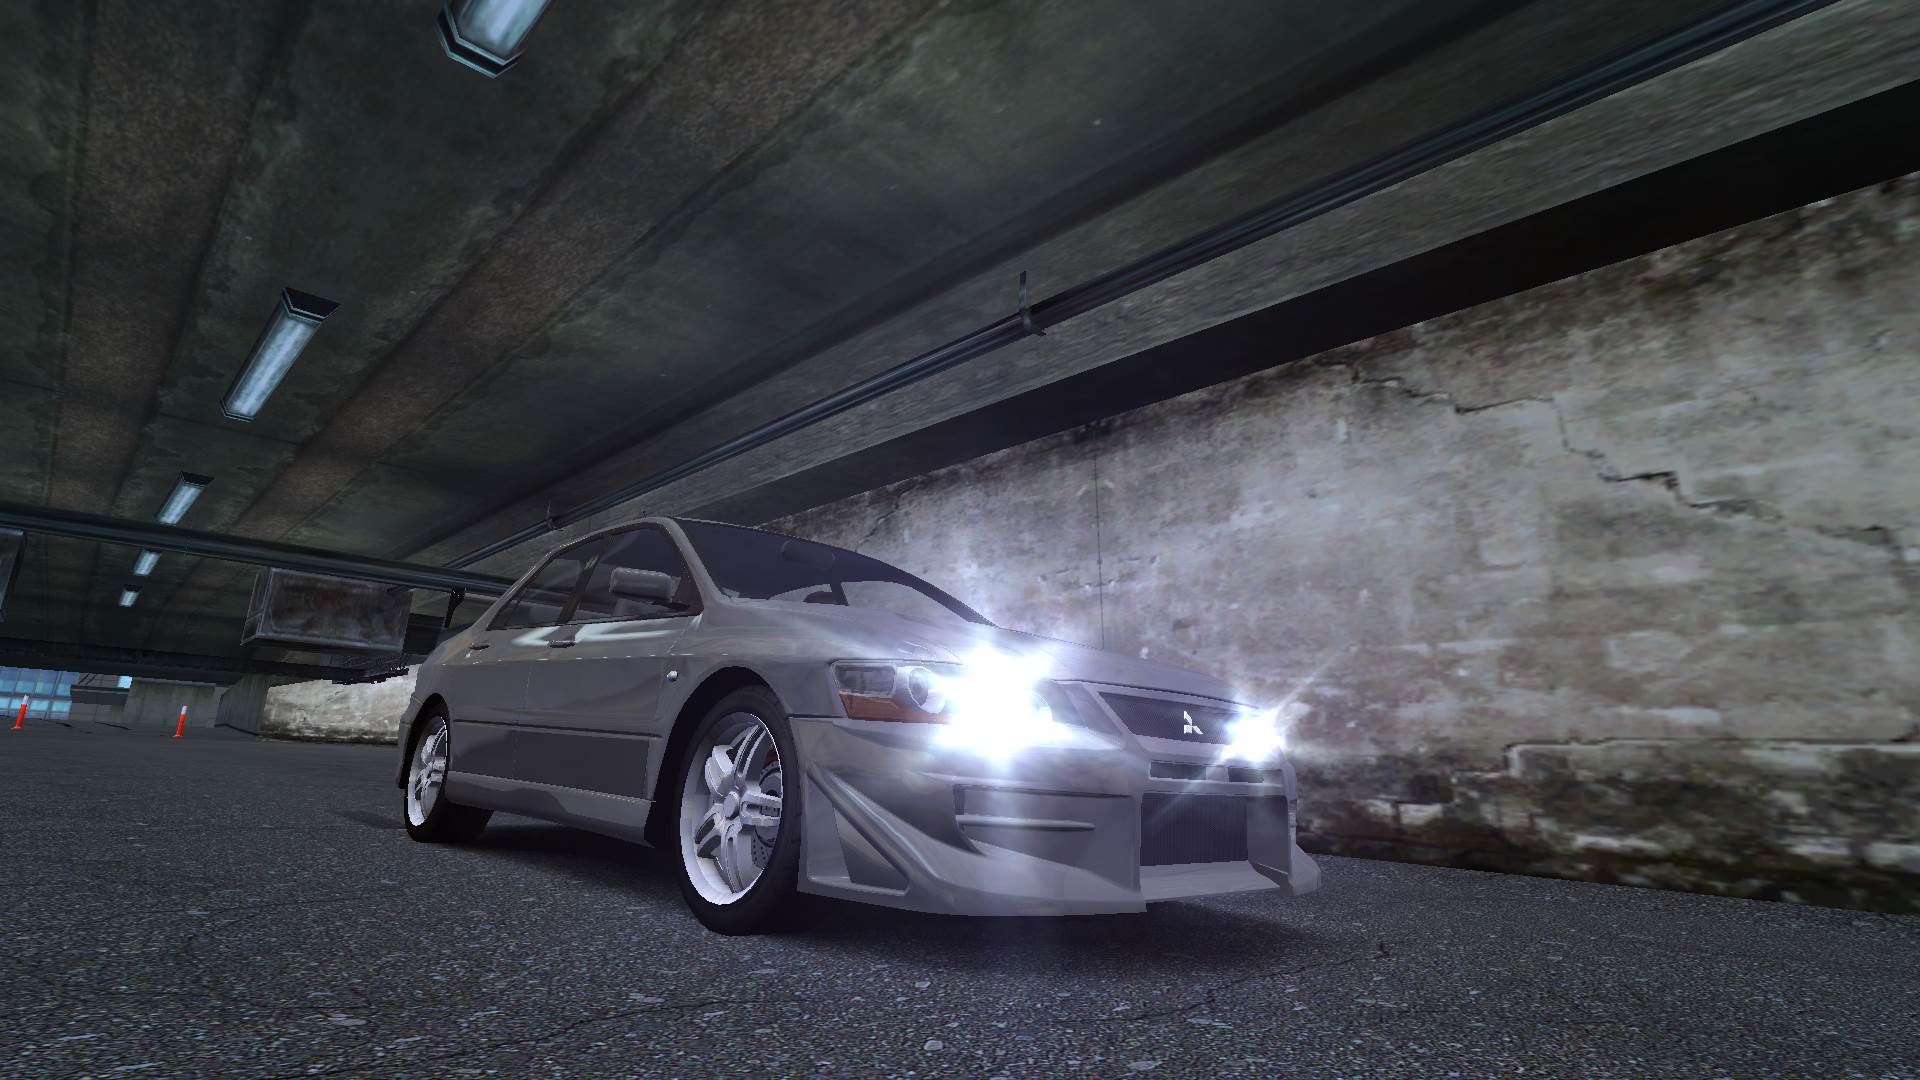 Need For Speed Most Wanted 2002 Mitsubishi Lancer Evolution VII